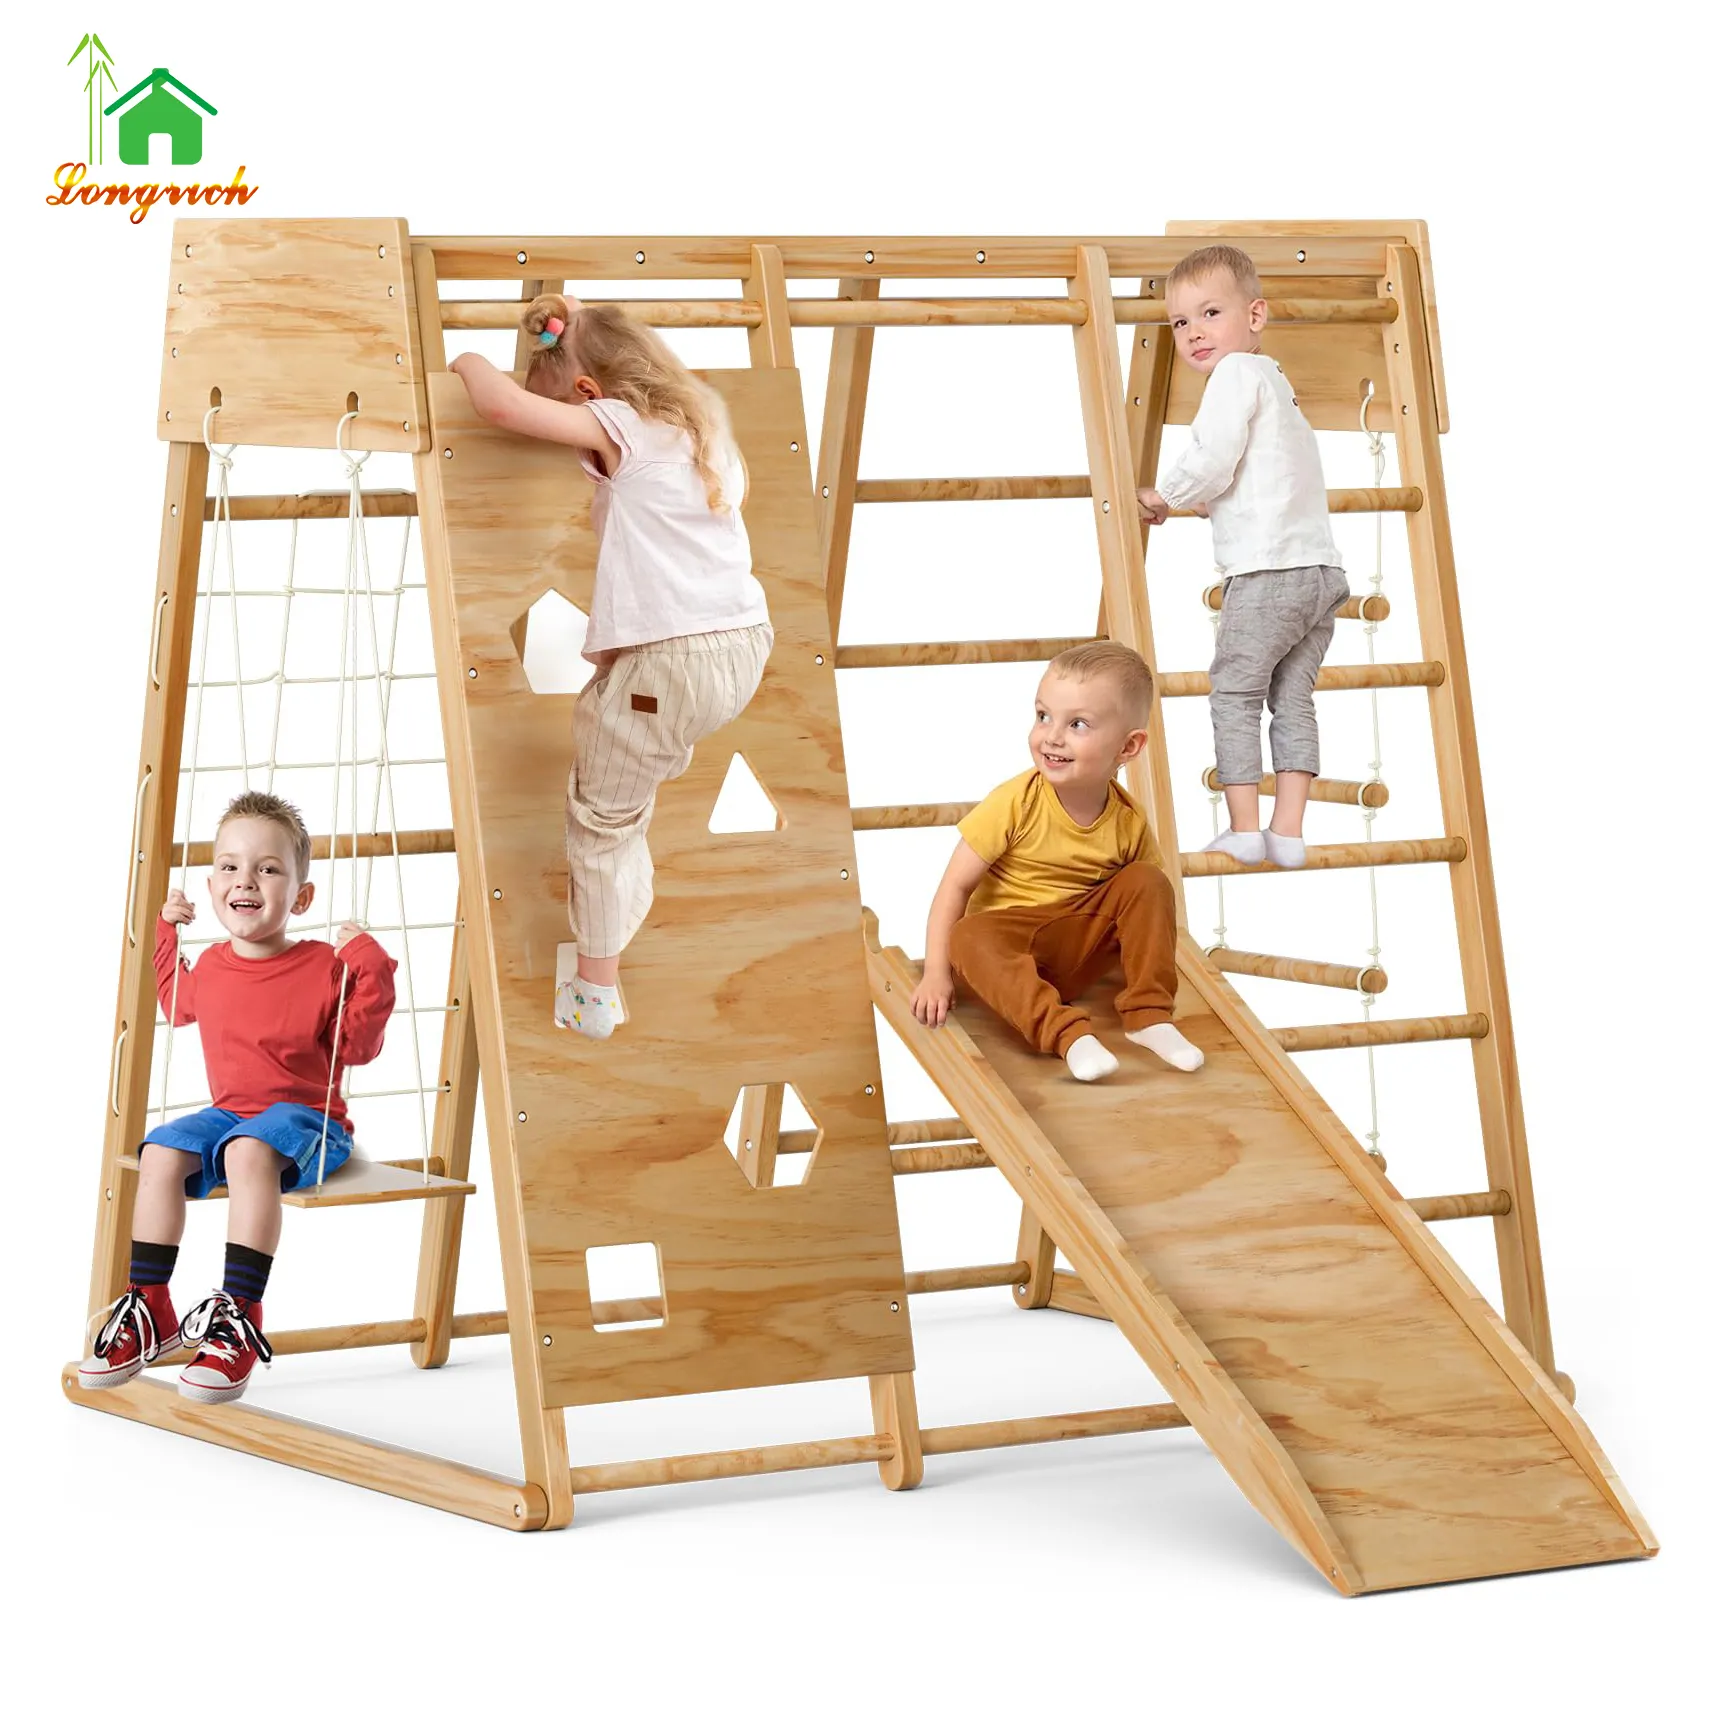 Climbing Rock Kids wooden Climb Frame 8-in-1 Climbing Toys Kids with Slide for Toddlers